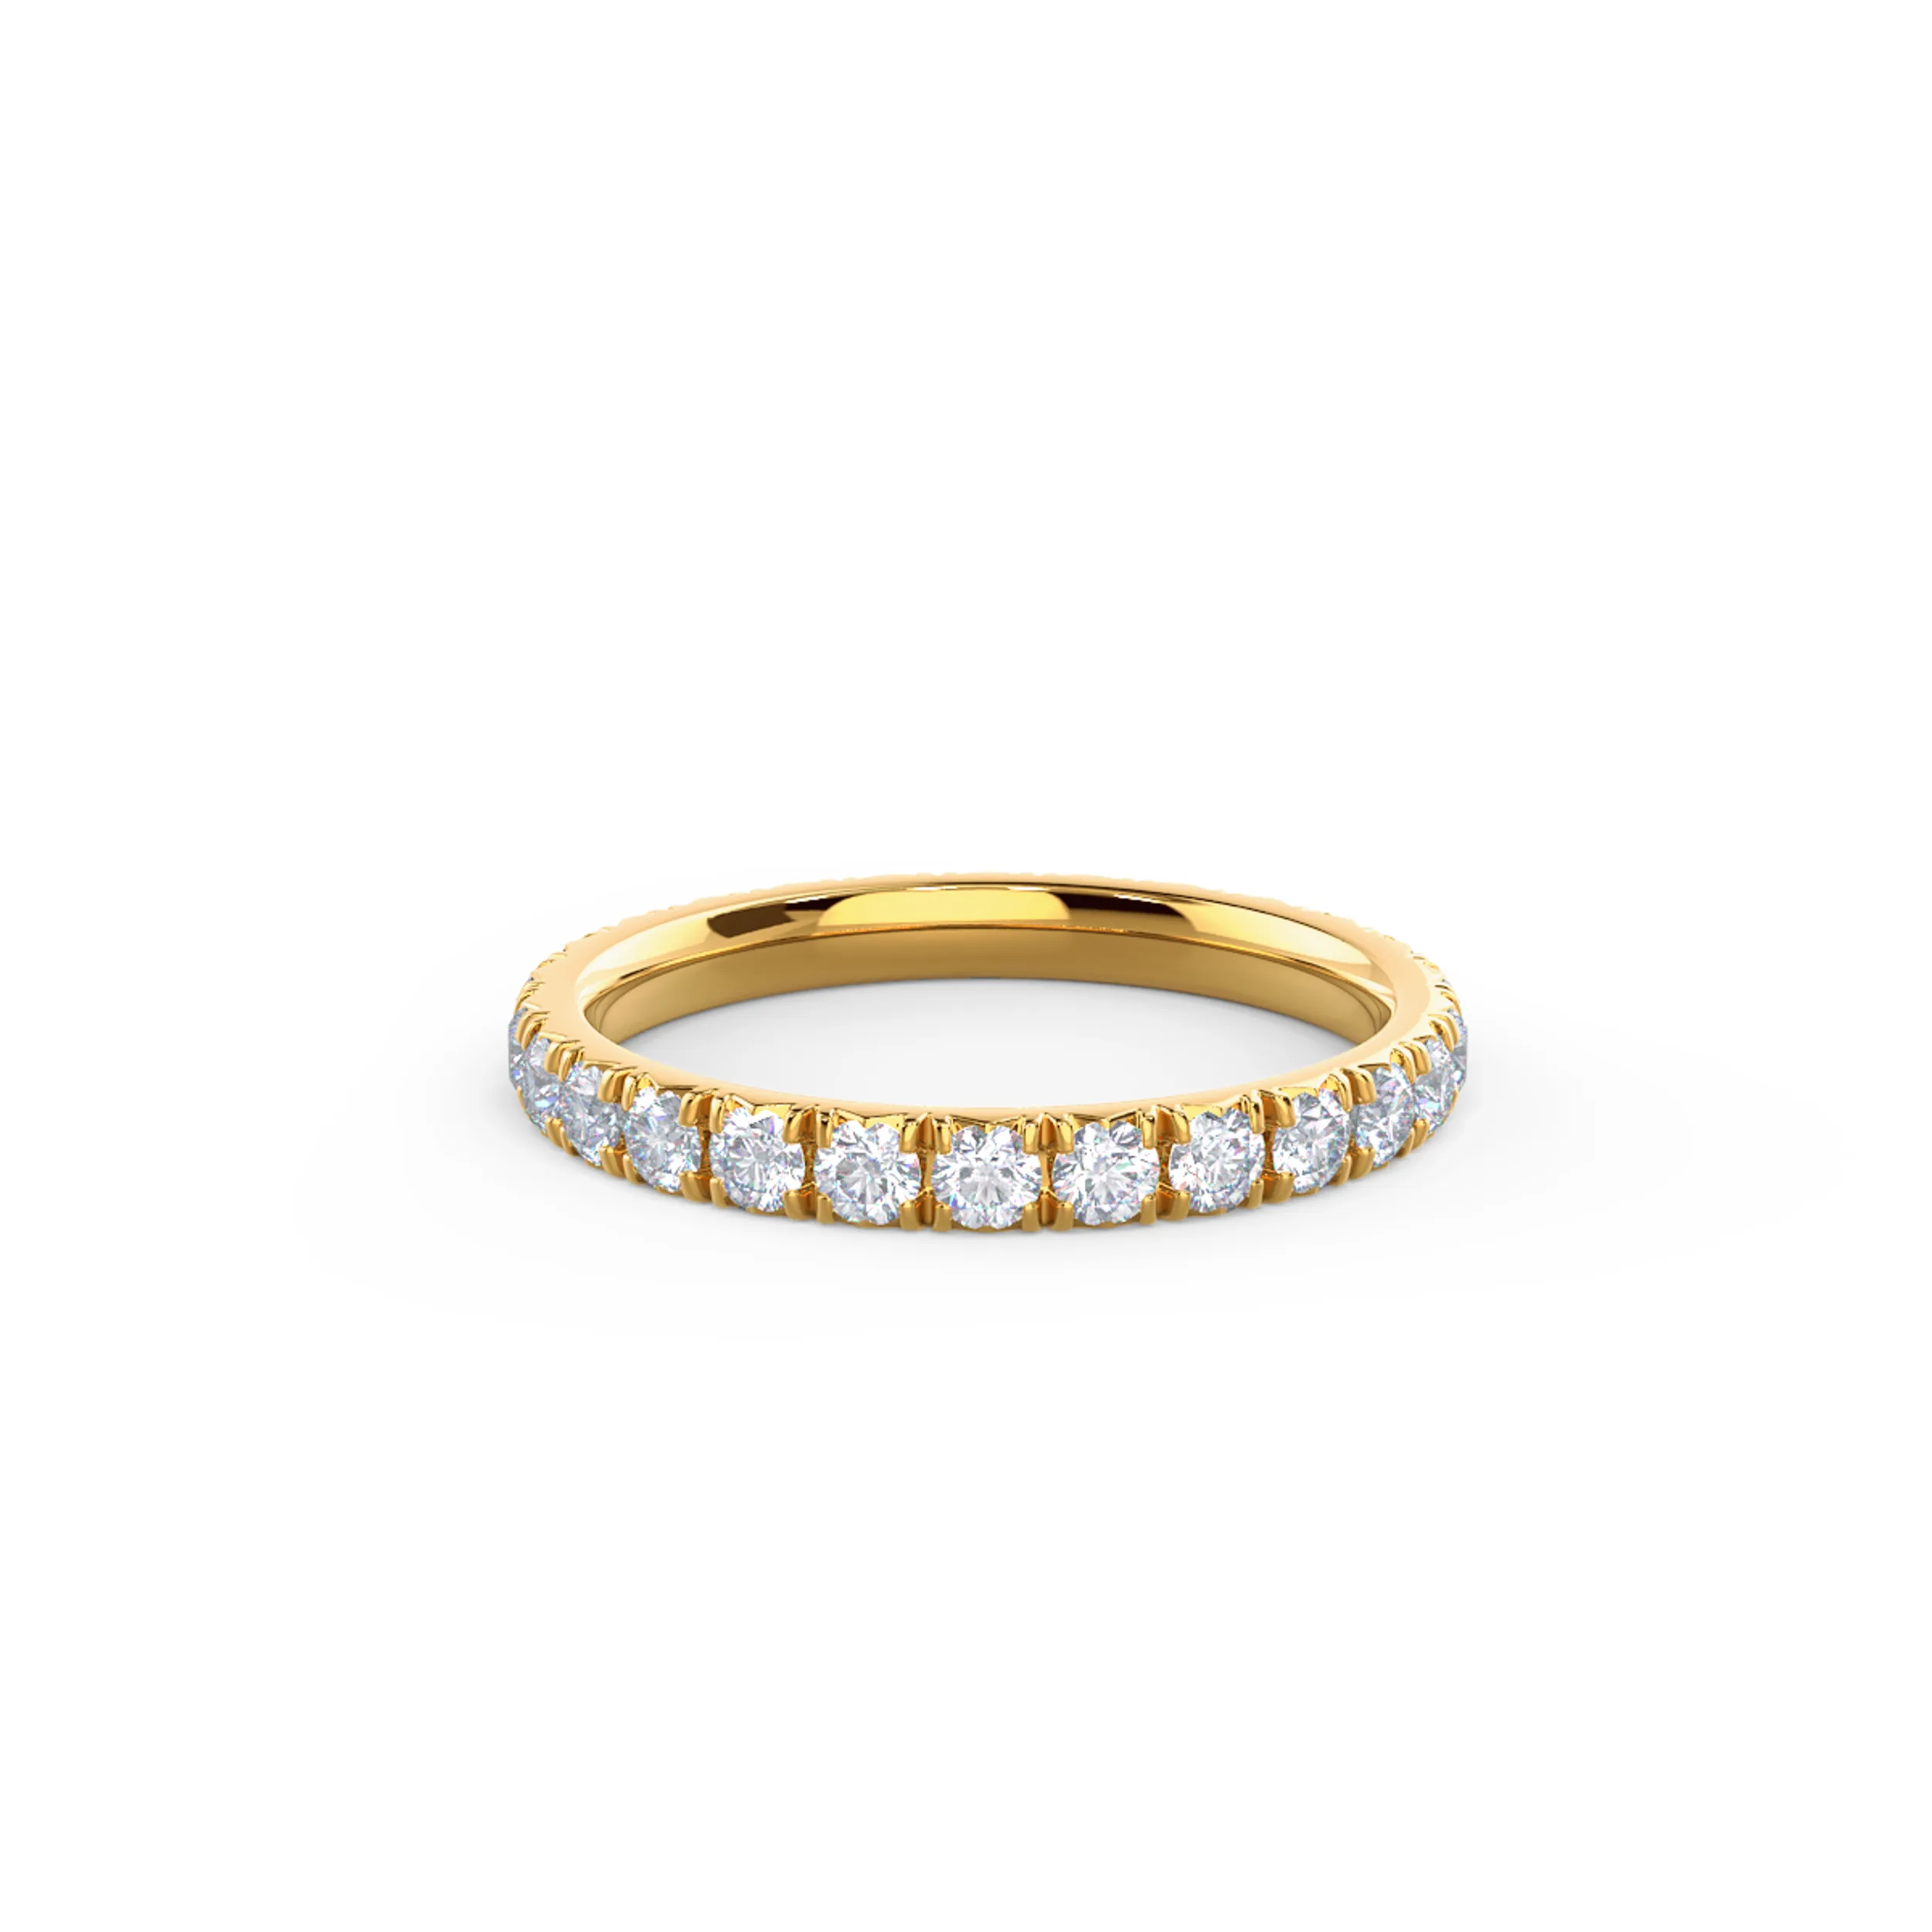 Exceptional Quality 1.0 ct Round Diamonds set in 14k Yellow Gold French Pavé Eternity Band (Main View)